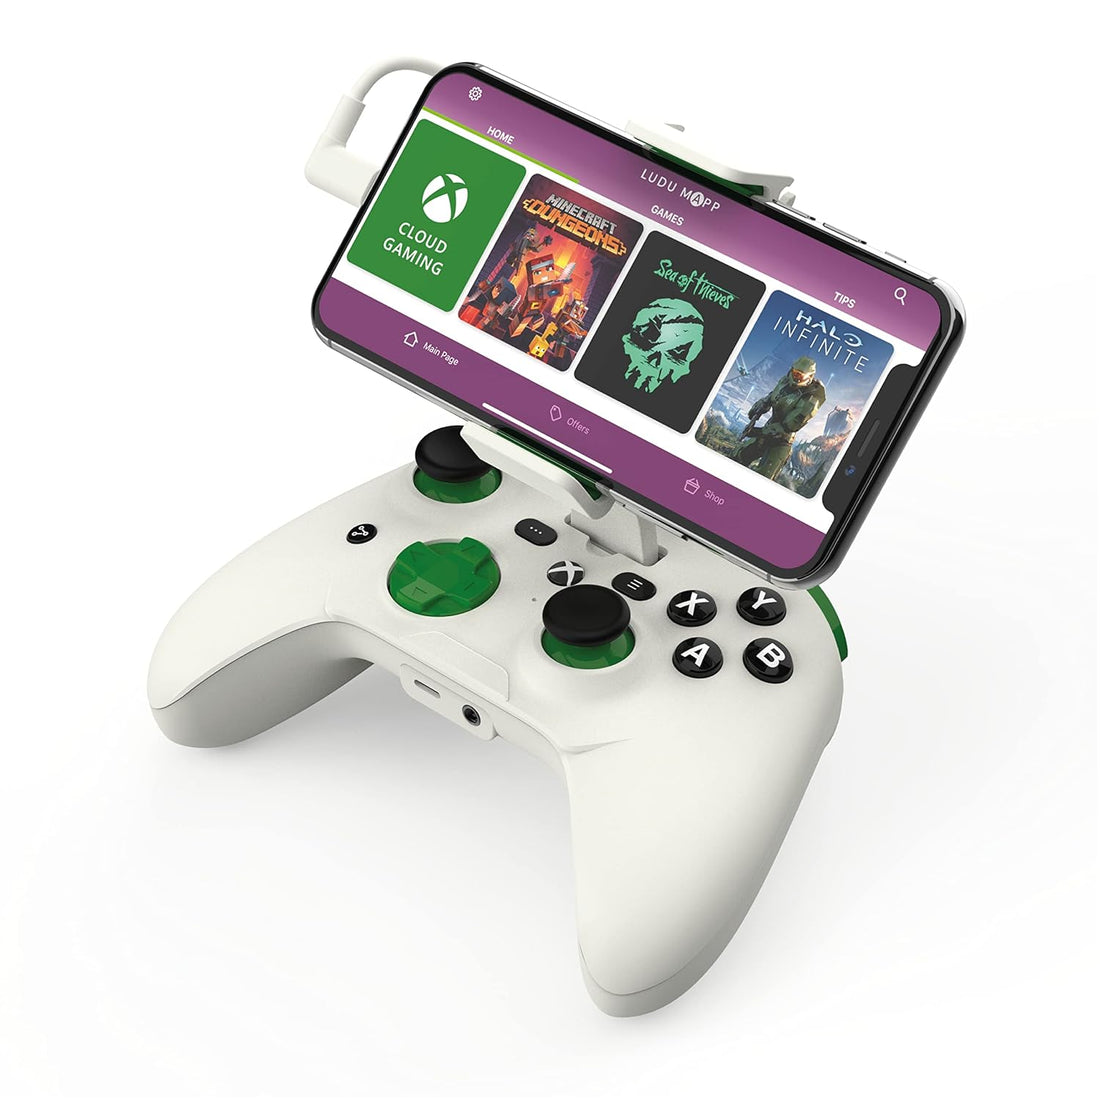 RiotPWR Mobile Gaming Controller for iOS Xbox Edition - White (Refurbished)